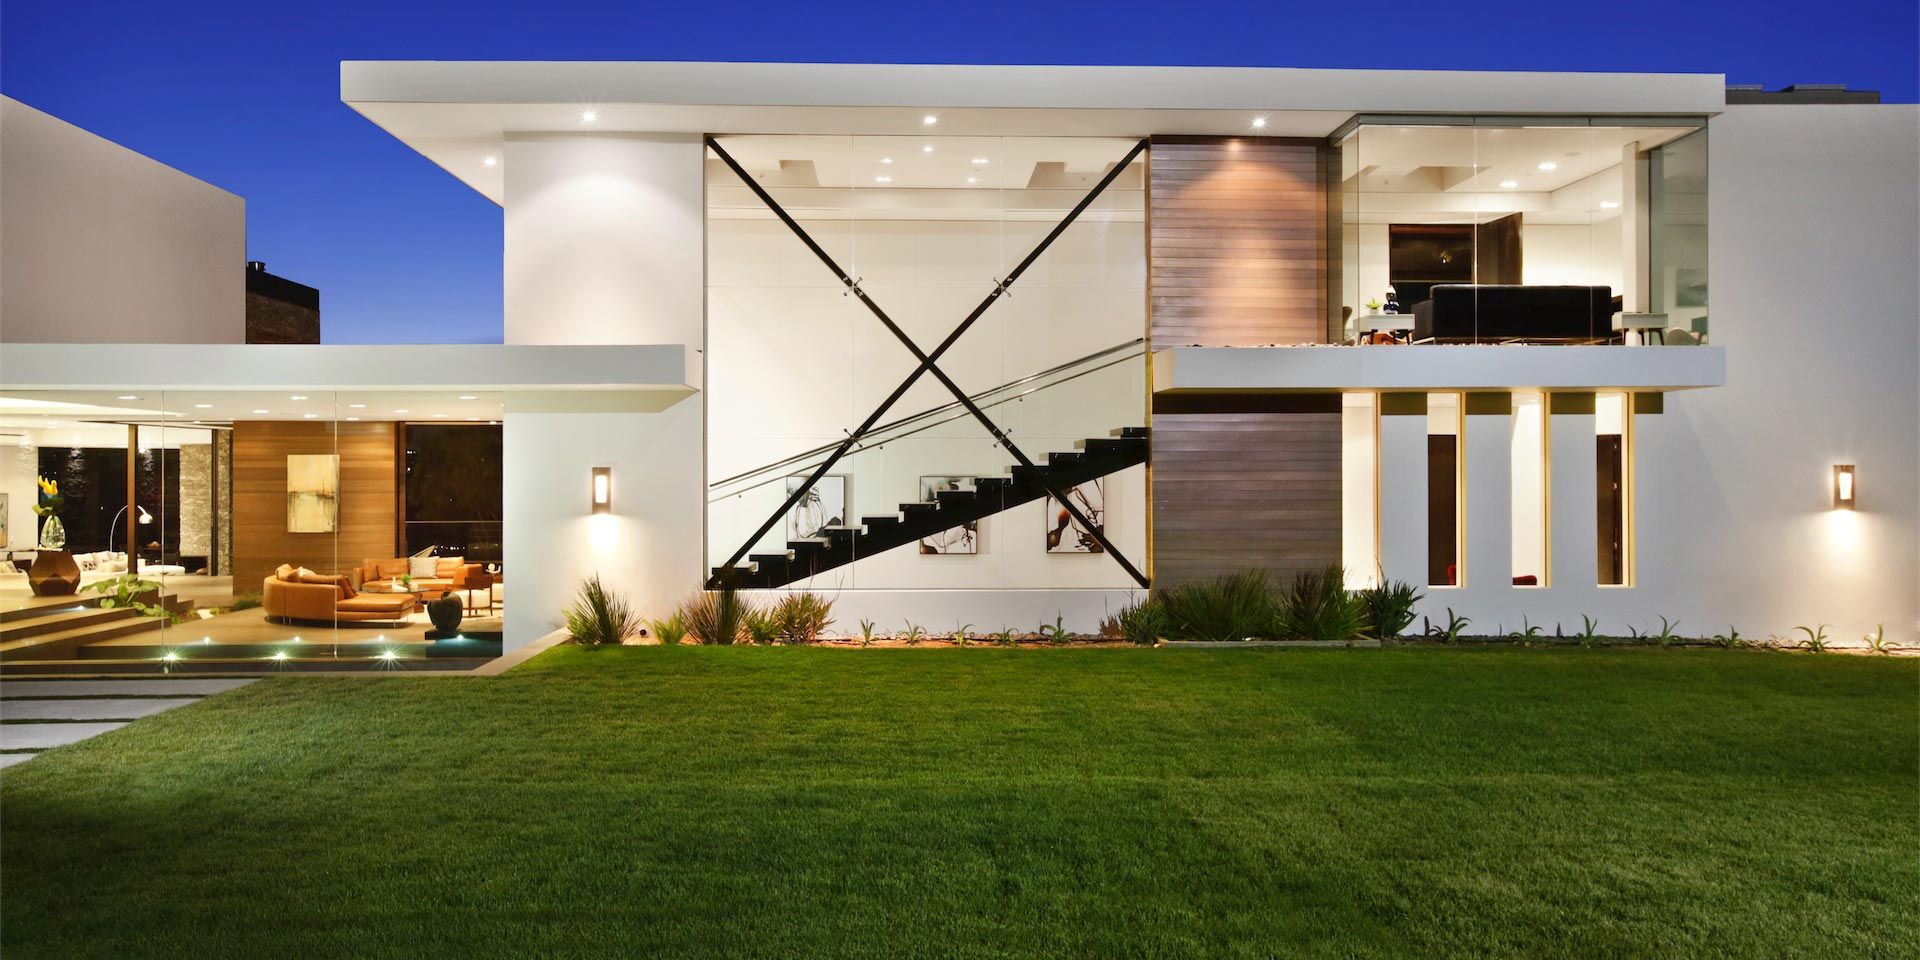 A modern two-story house with a large glass facade, sleek exterior design, and a well-manicured lawn, illuminated beautifully in the evening.